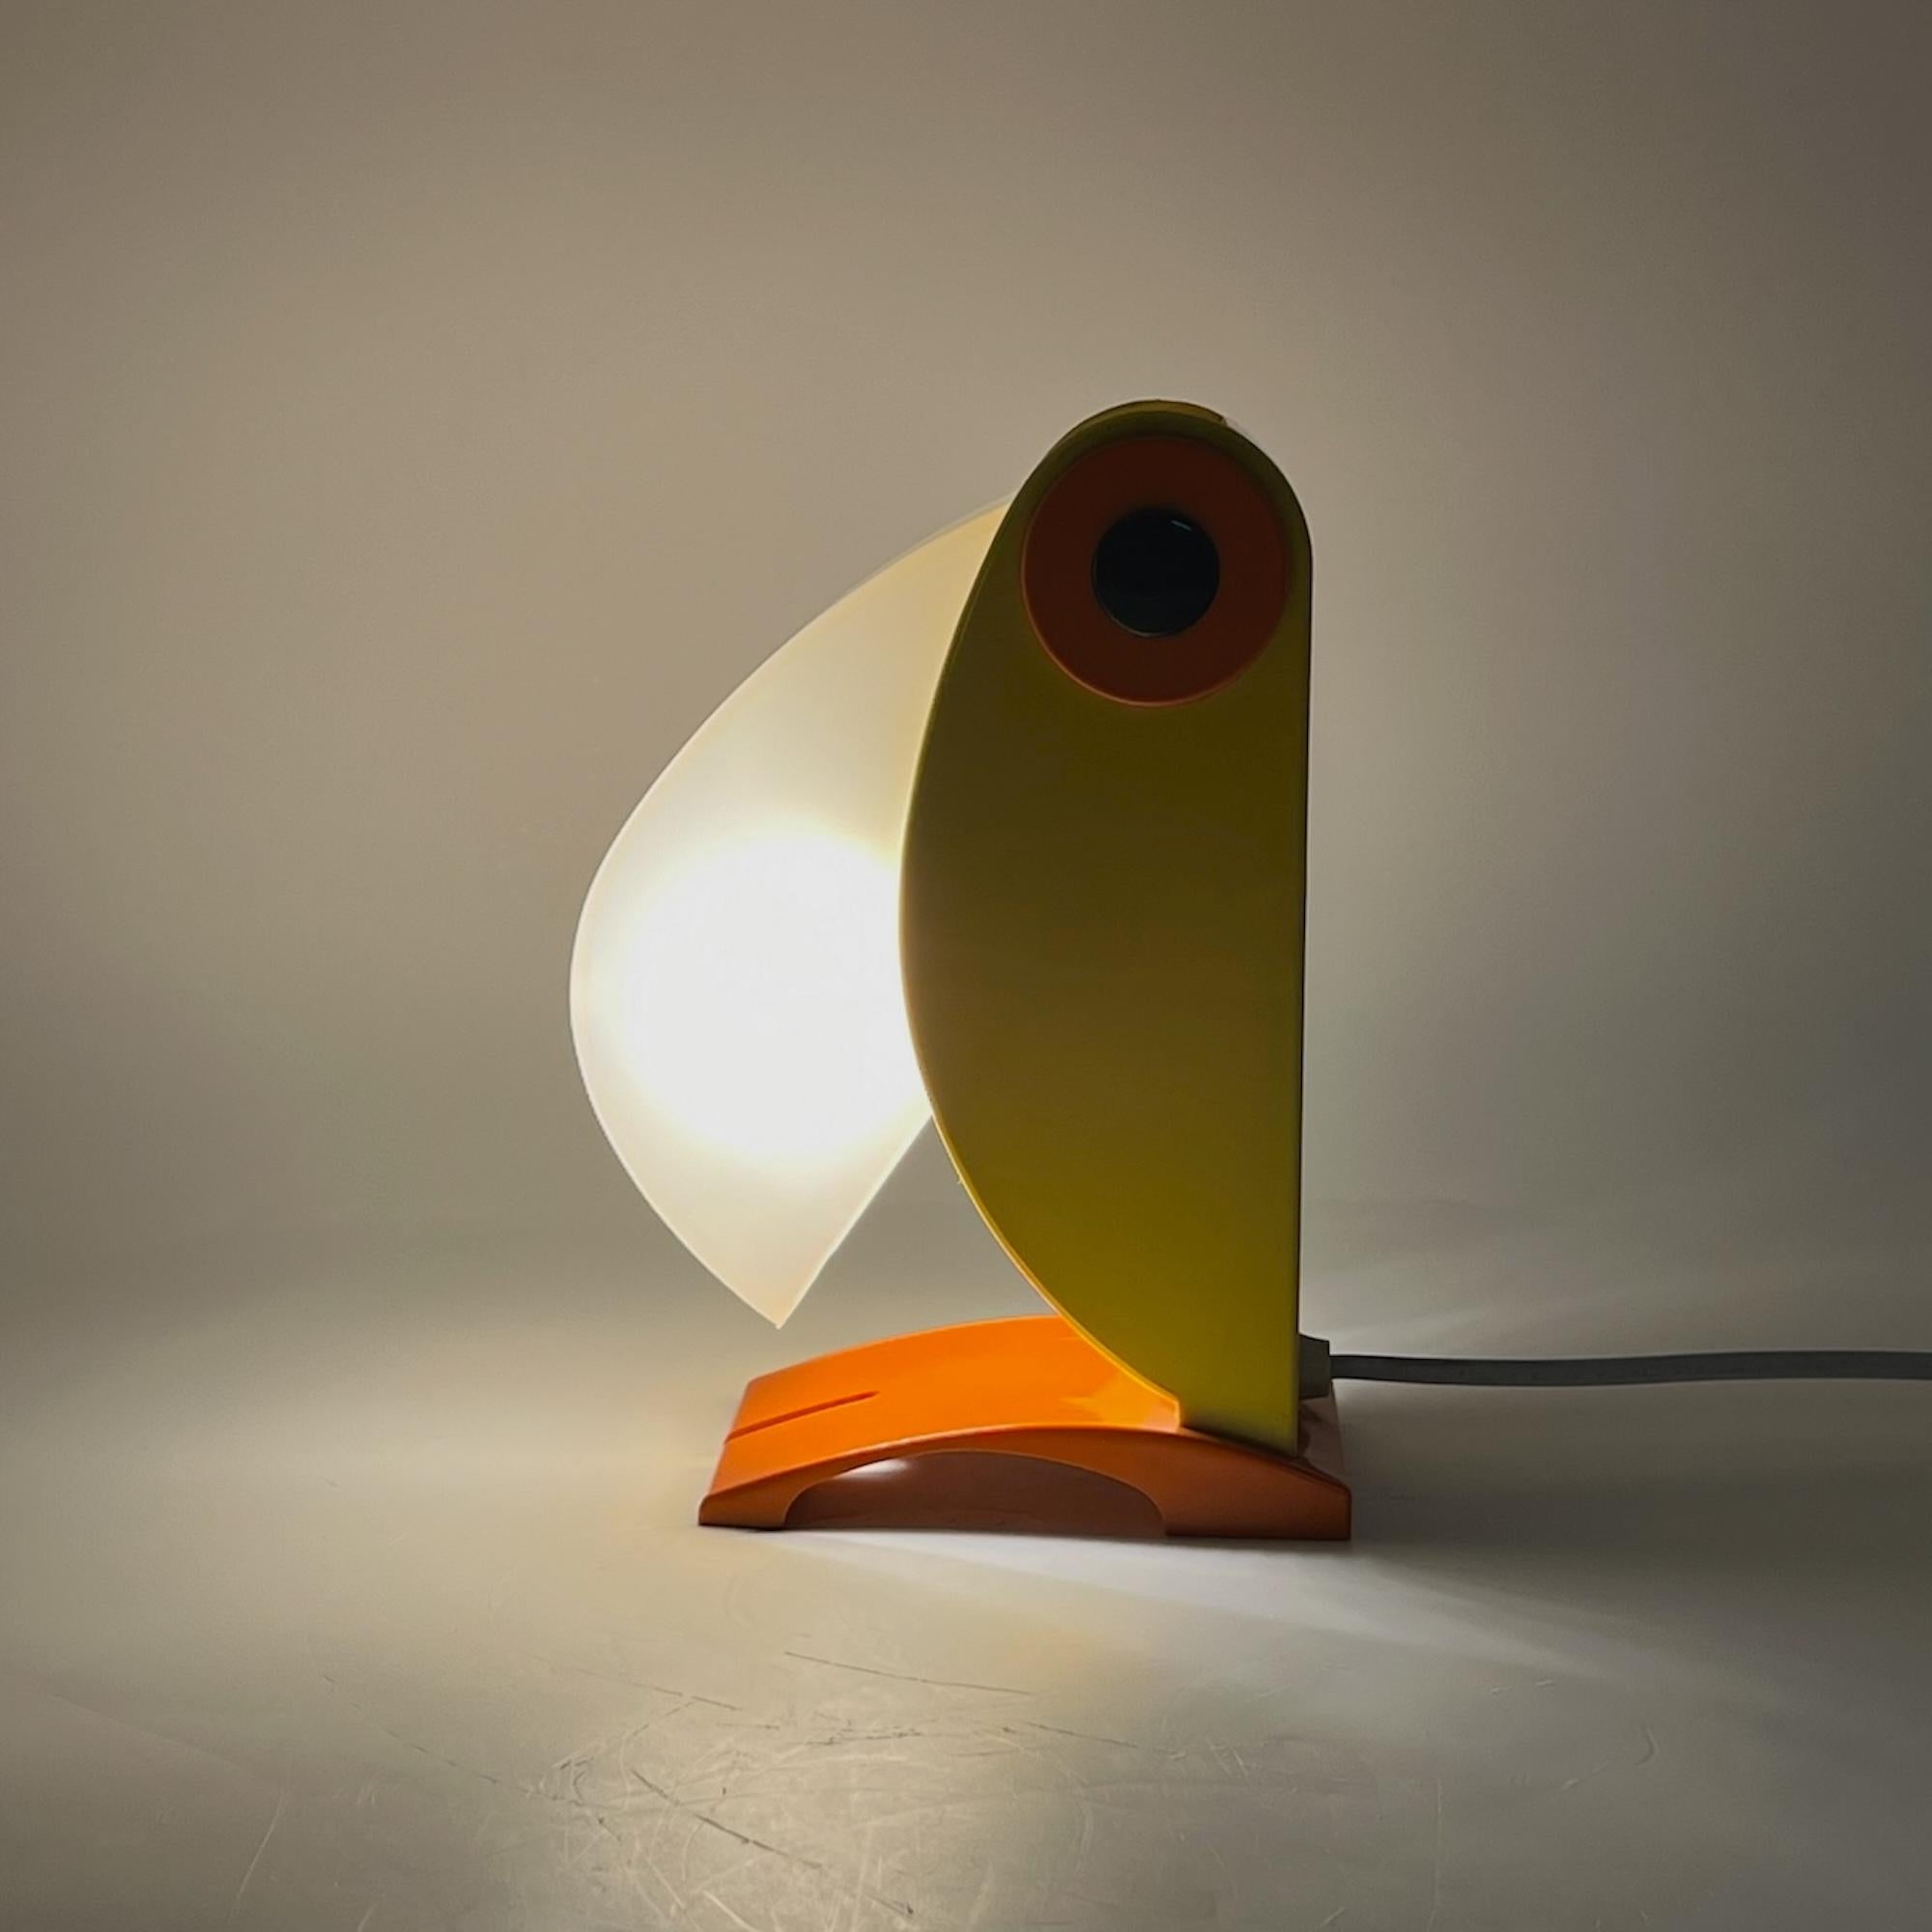 Step into the captivating world of vintage 70s lamps with our exceptional Toucan lamp designed by Enea Ferrari for Old Timer Ferrari in 1970.

Inspired by real-life wonders, Enea Ferrari crafted the world’s first children’s lamp, setting a trend